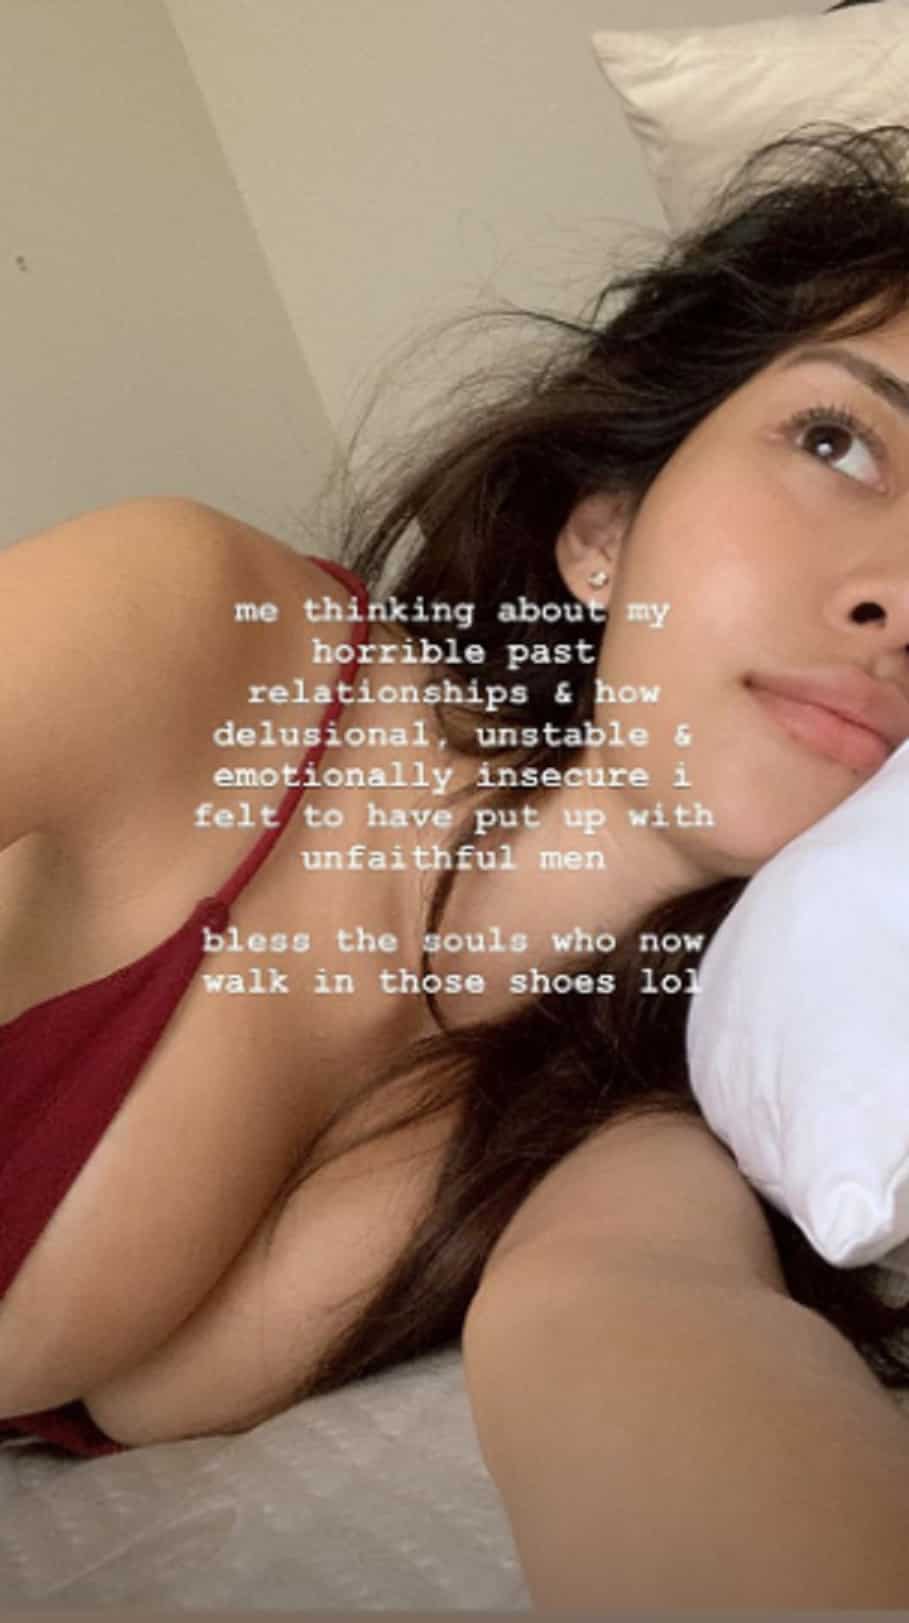 James Reid's ex-GF Ericka Villongco writes an intriguing post about her past relationships